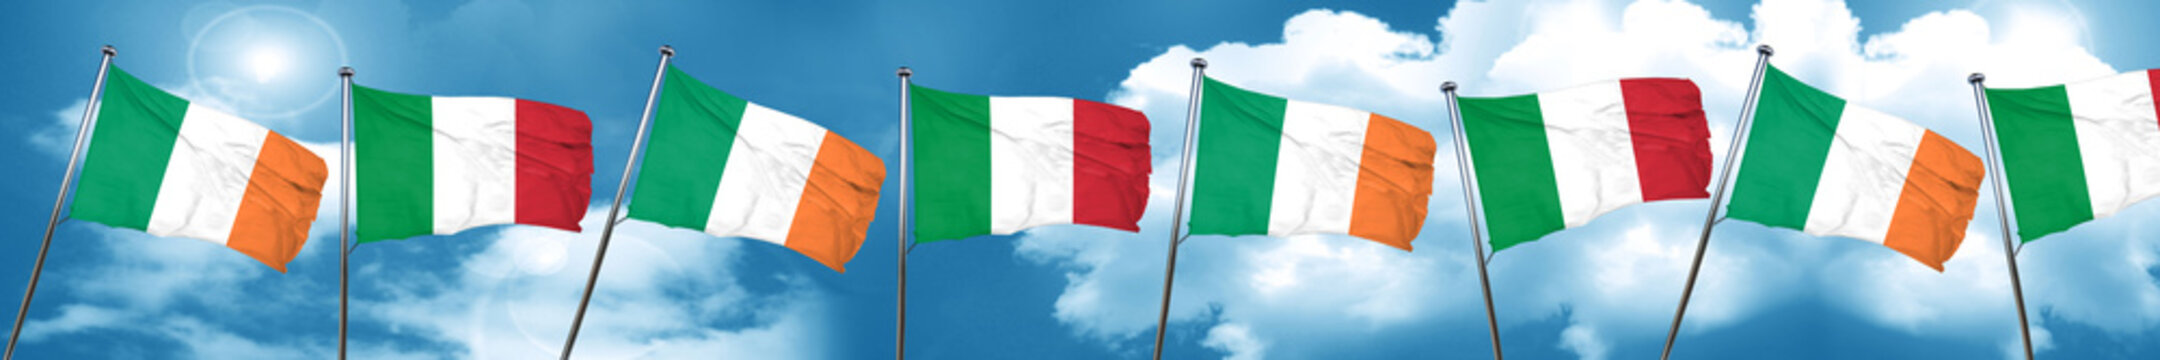 Ireland flag with Italy flag, 3D rendering